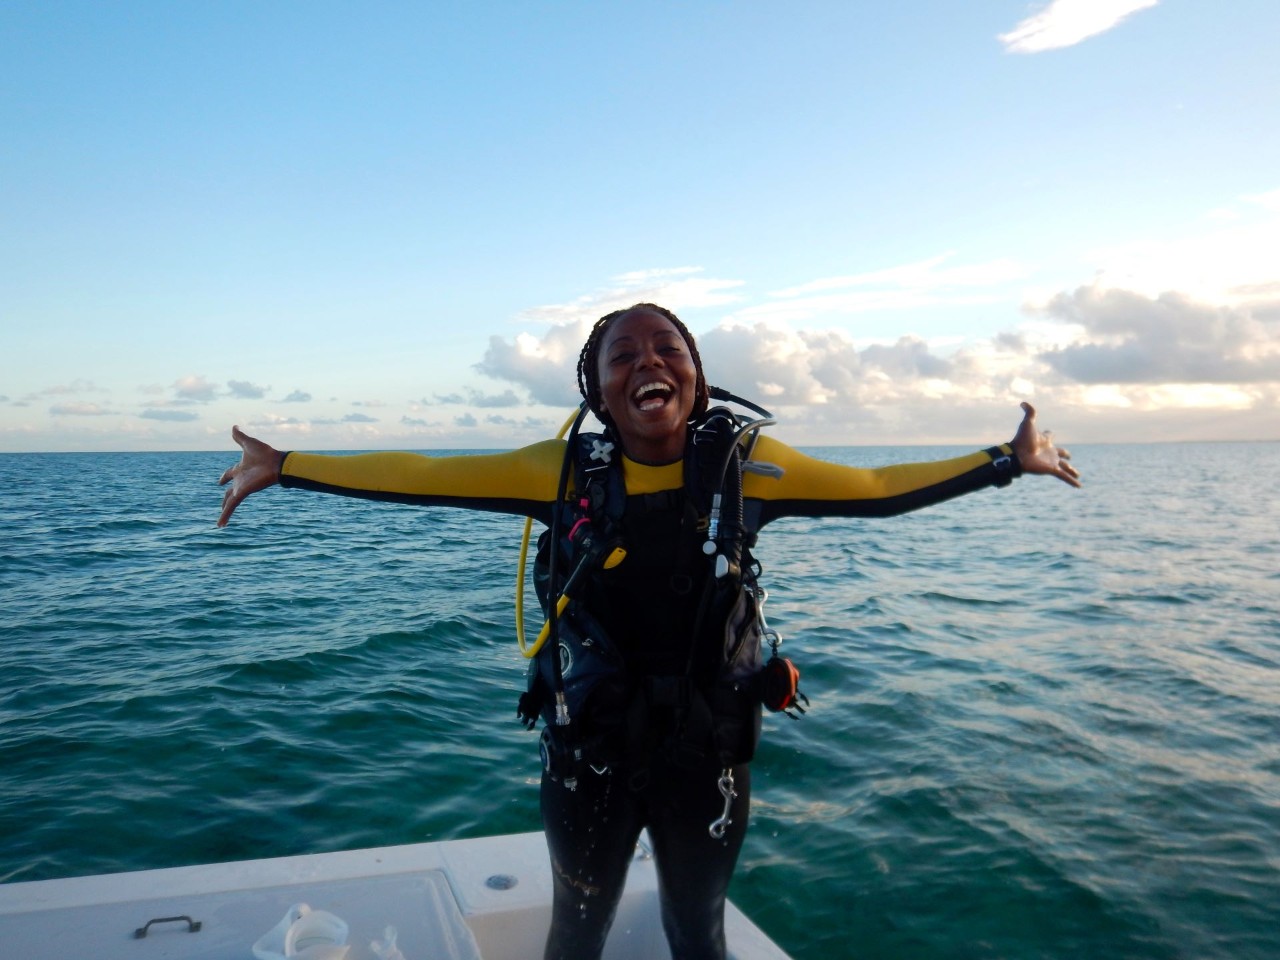 A Black woman smiling, standing on a boat with her arms spread out, wearing diving equipment